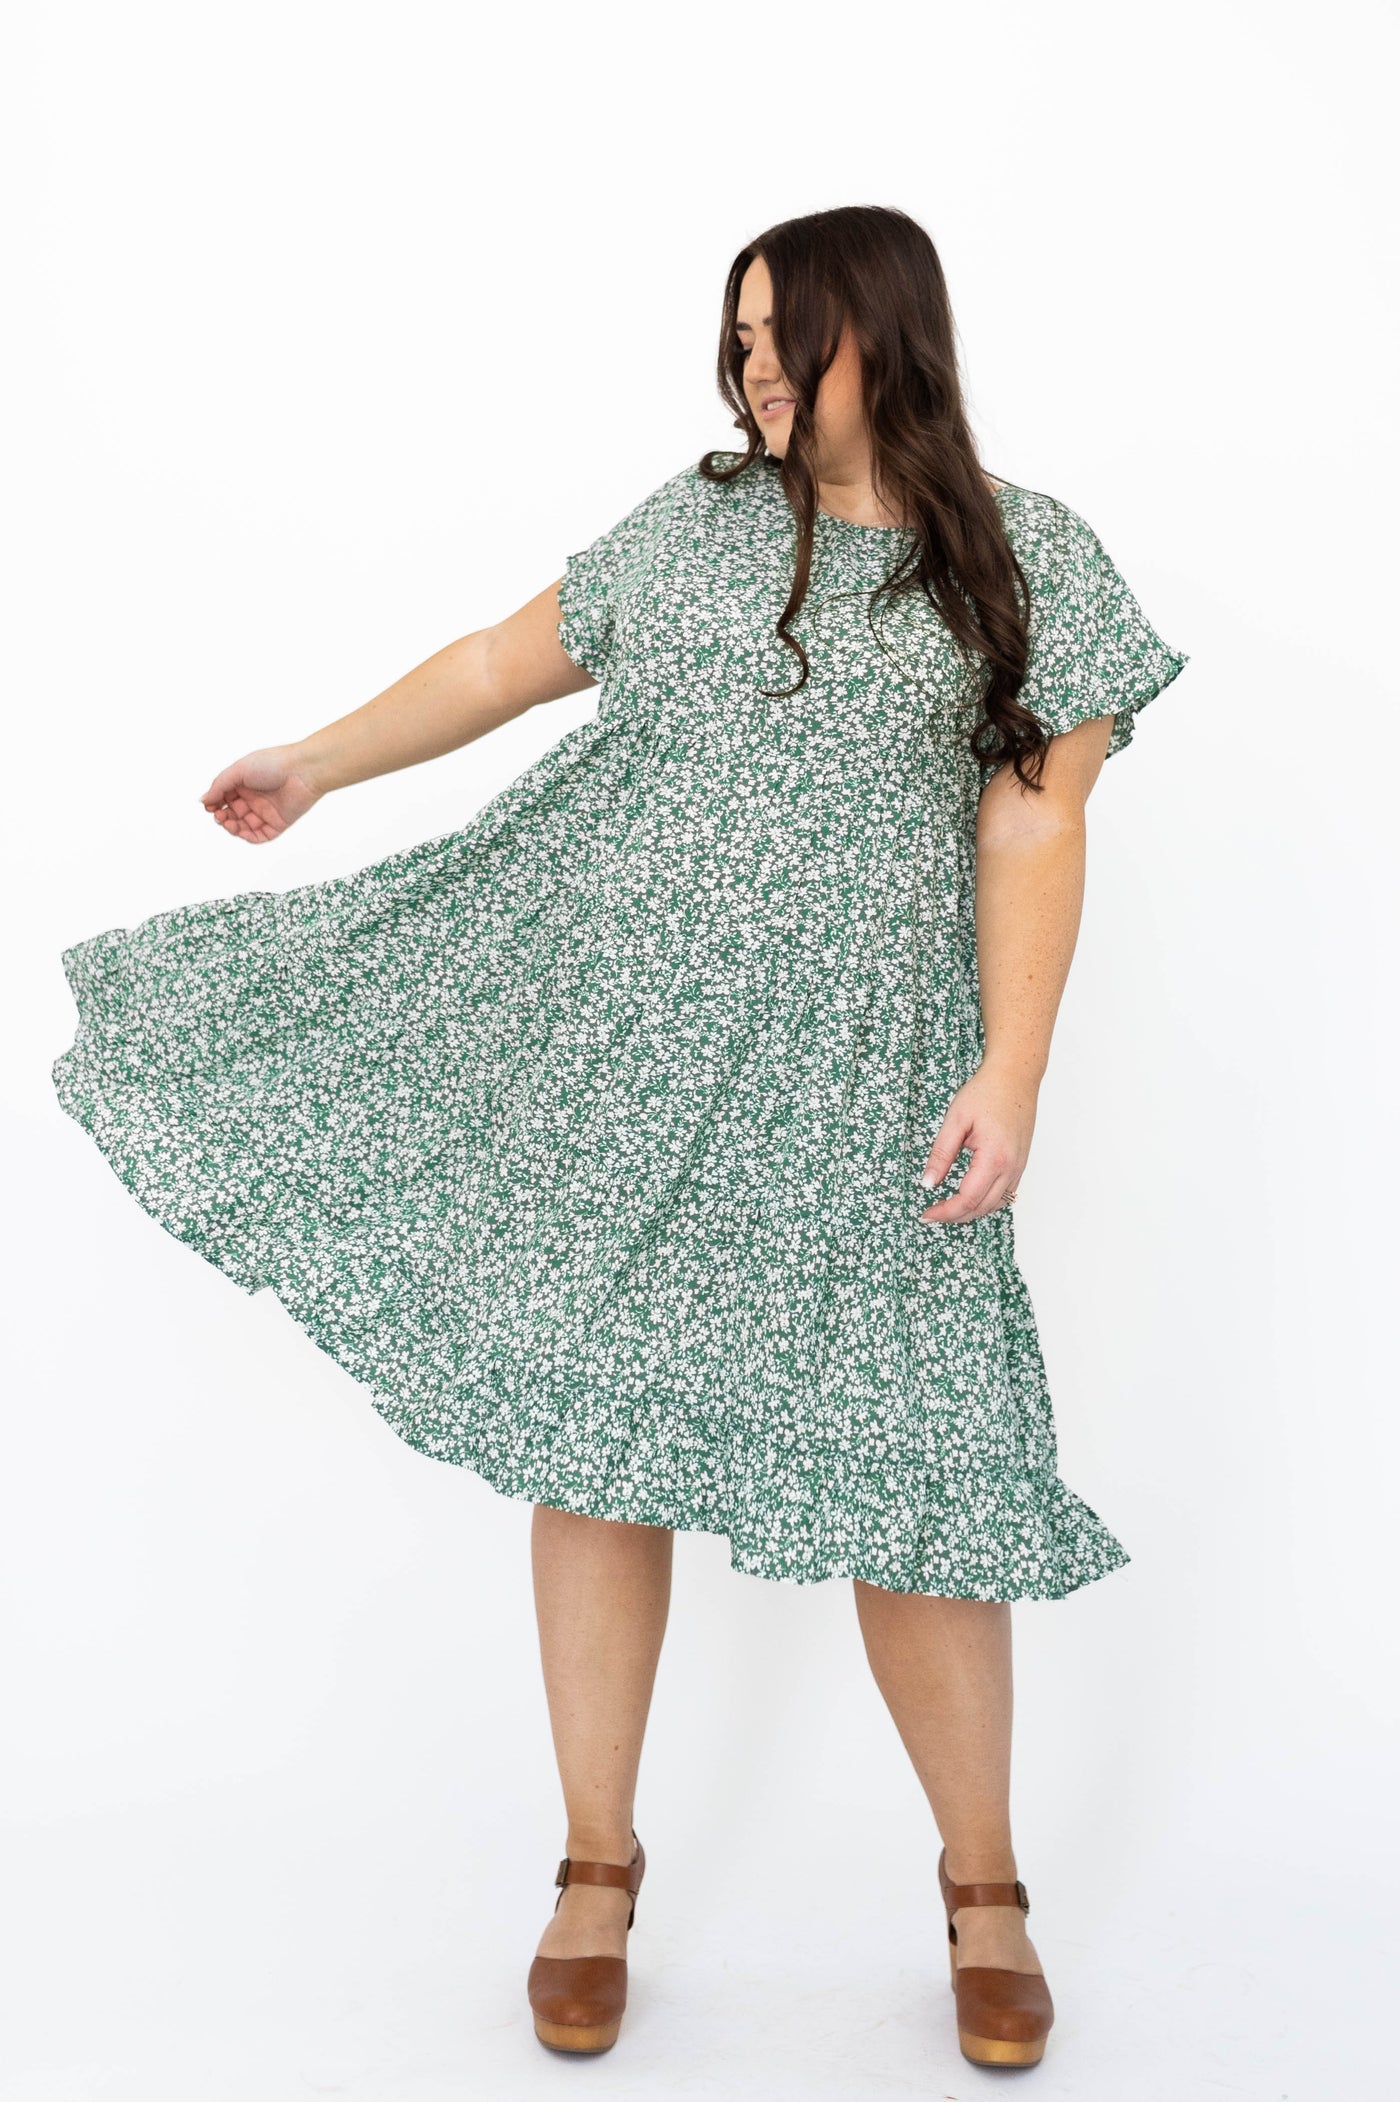 Tiered skirt plus size green floral dress